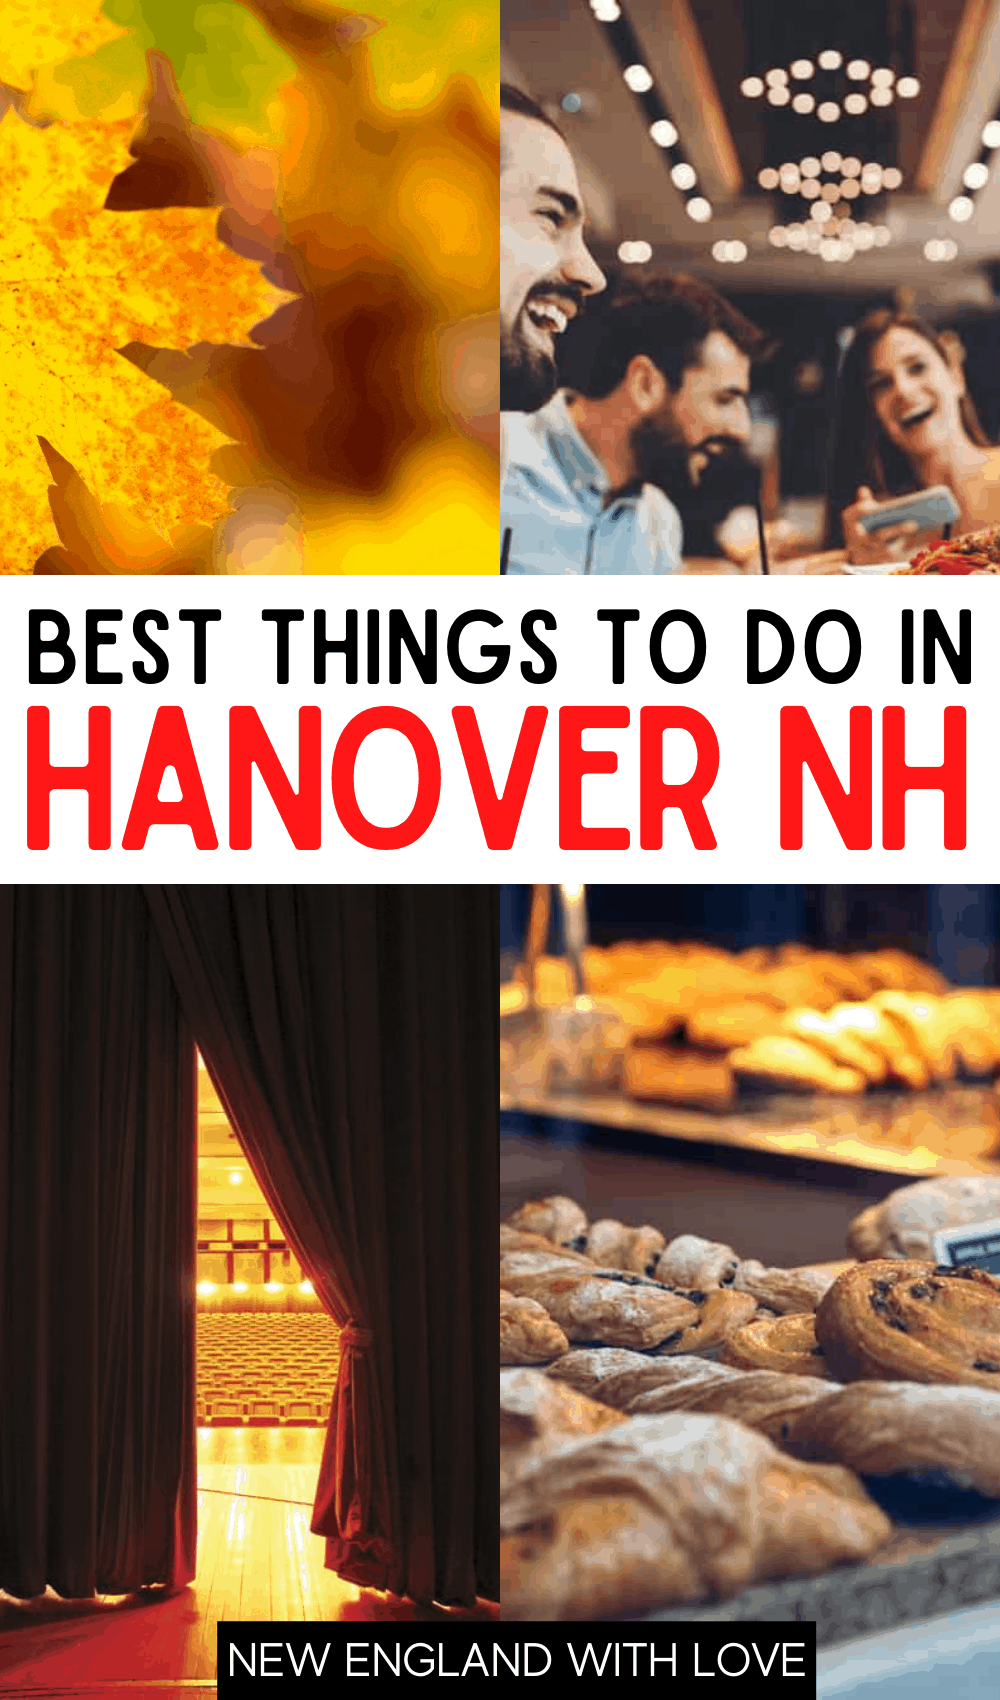 Pinterest graphic reading "Best Things To Do In Hanover NH"